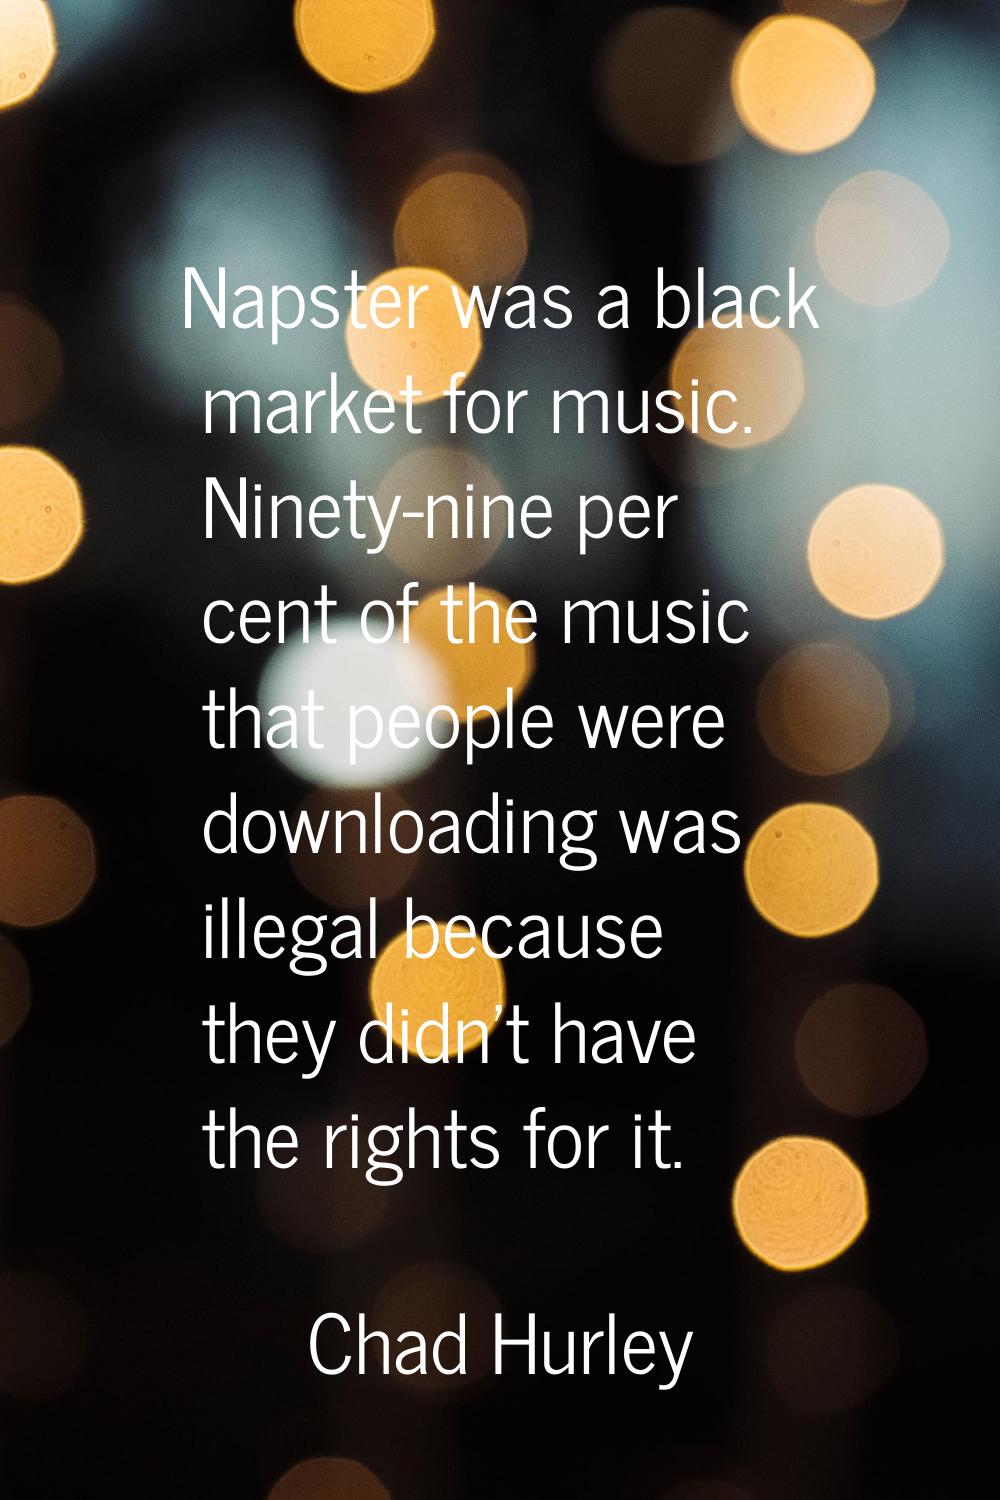 Napster was a black market for music. Ninety-nine per cent of the music that people were downloadin